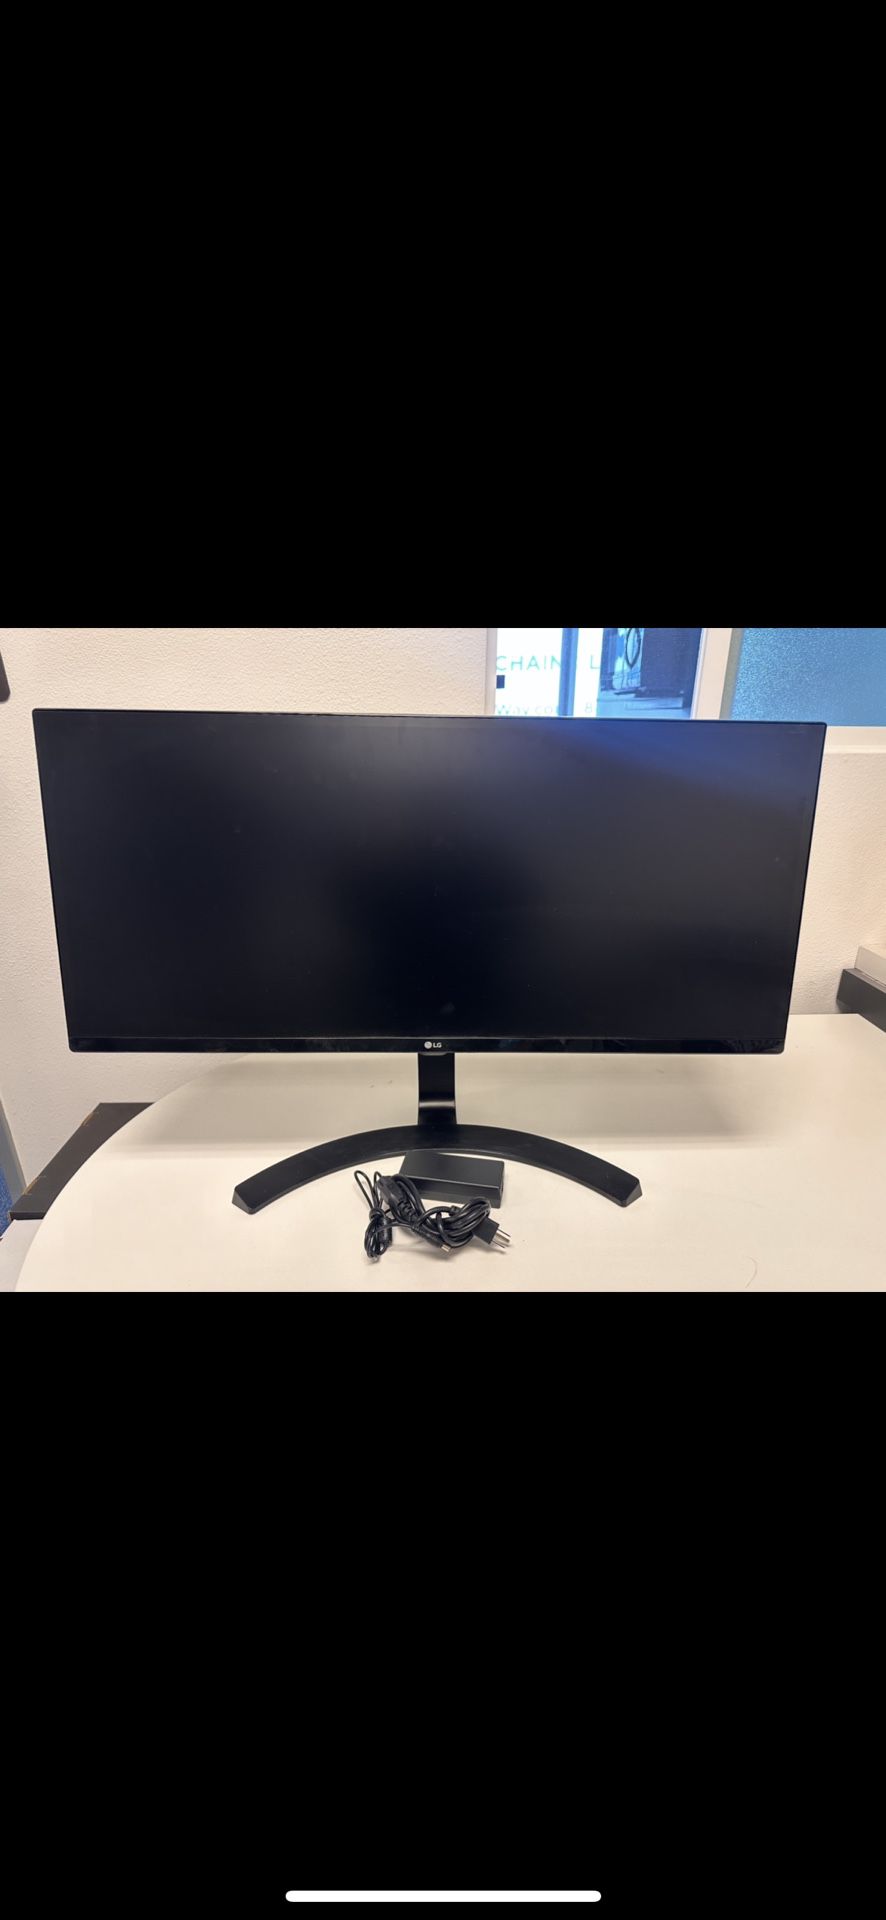 LG 34 in. Curved monitors from Amazon originally $346